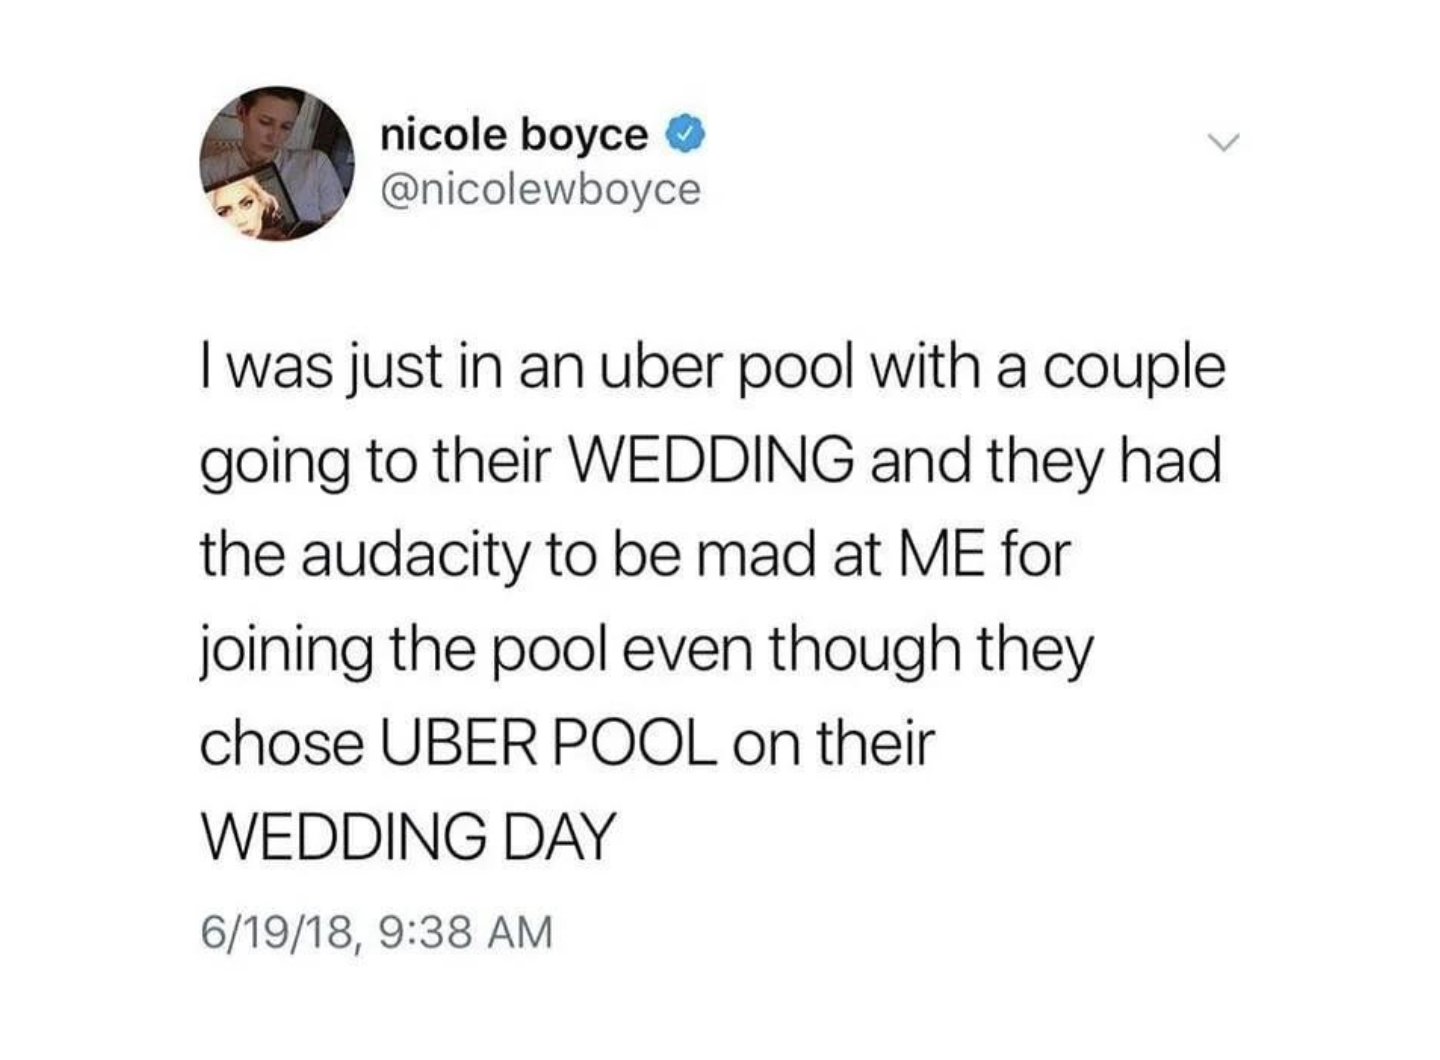 &quot;I was just in an uber pool with a couple going to their WEDDING and they had the audacity to be mad at ME for joining the pool even though they chose UBER POOl on their WEDDING DAY&quot;